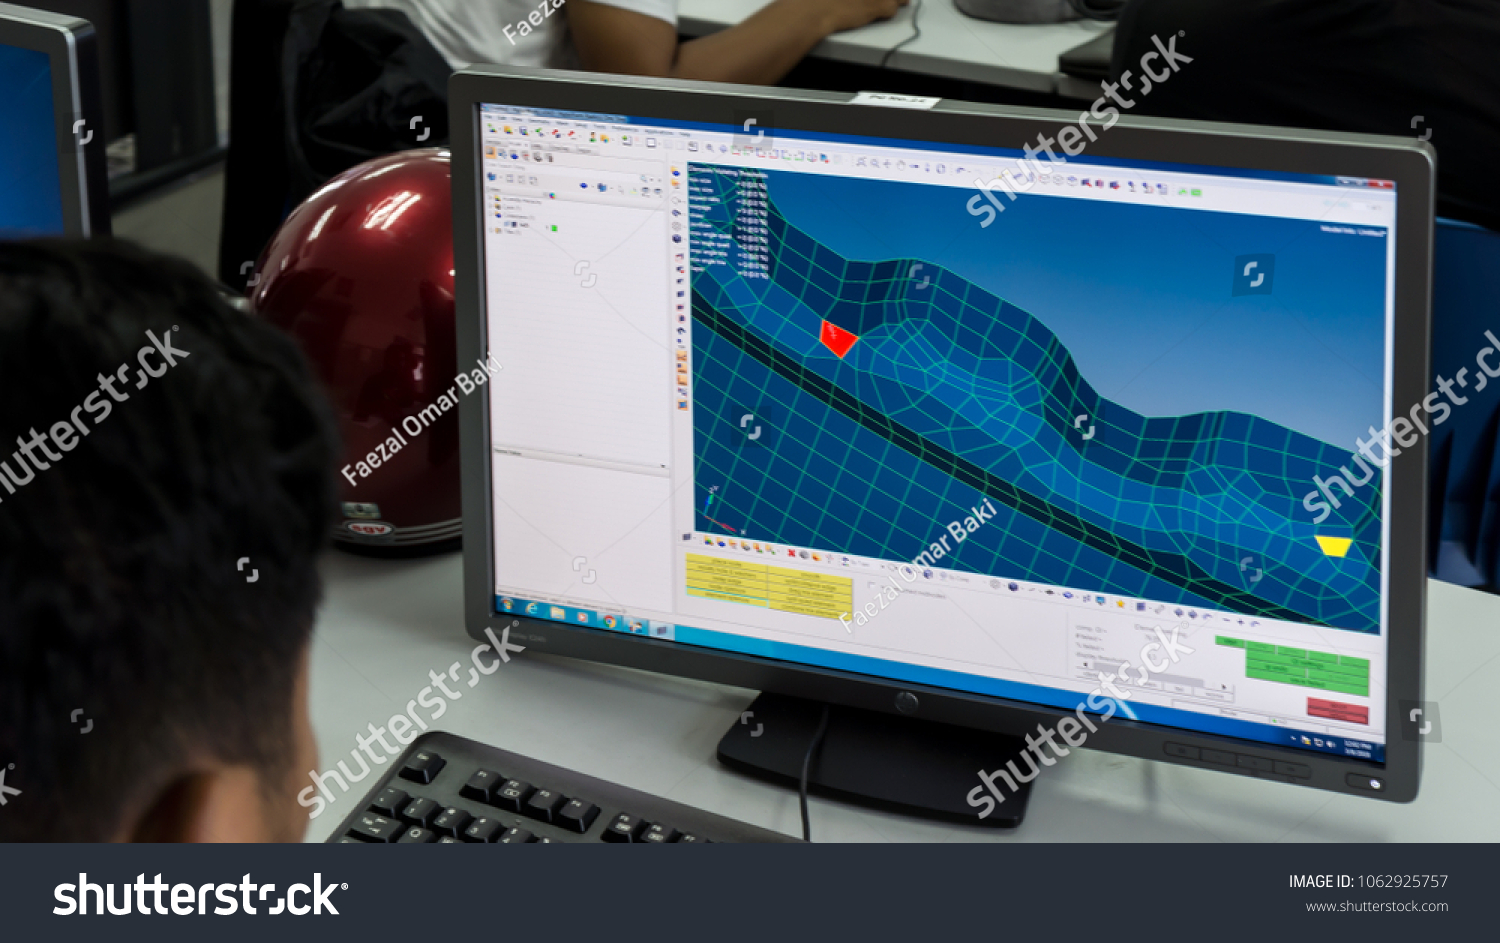 SELANGOR,MALAYSIA-MARCH 8,2018: A college students are designing and doing analysis in CAD software. Working on their project assignment in lab design near Bangi,Selangor. Shot taken on March 8,2018. #1062925757